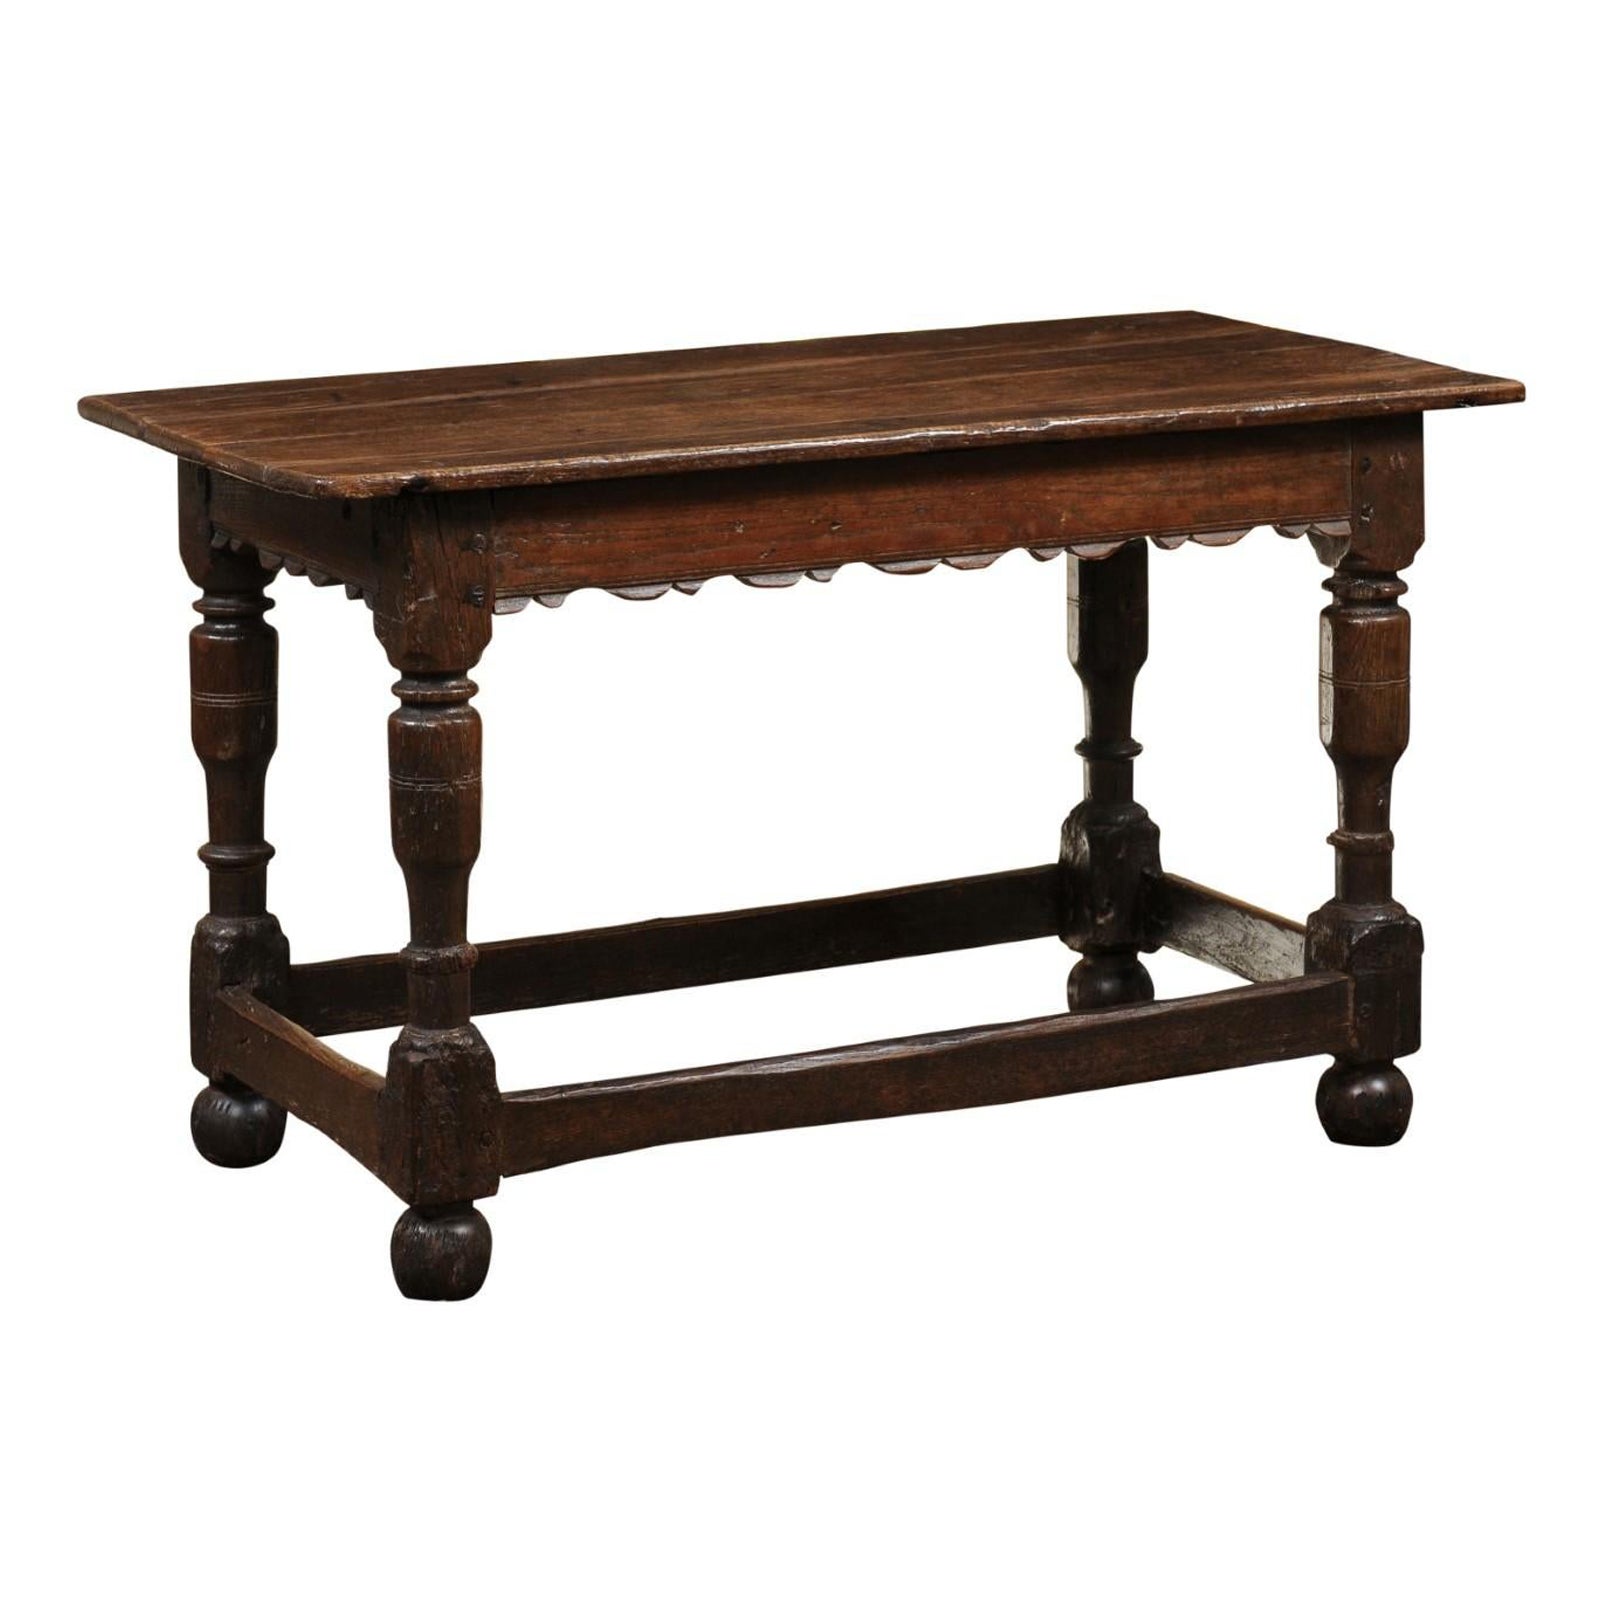 Early 18th C Oak Console Table with Carved Apron, Turned Legs & Box stretcher For Sale